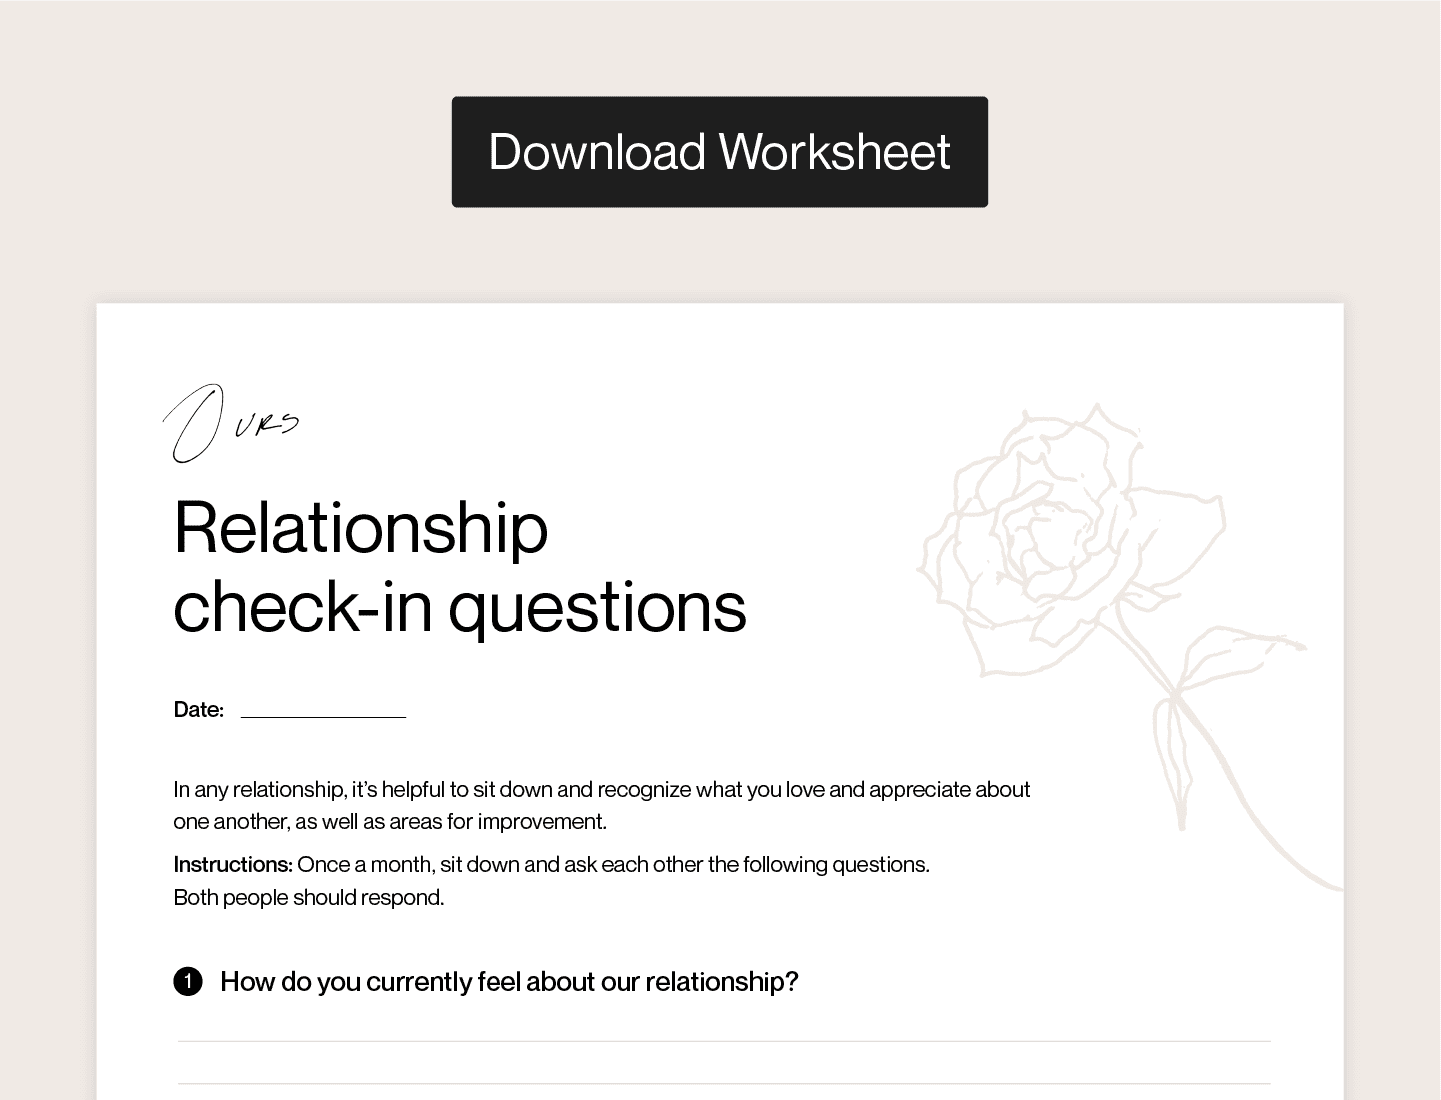 A snippet of Ours relationship check-in questions